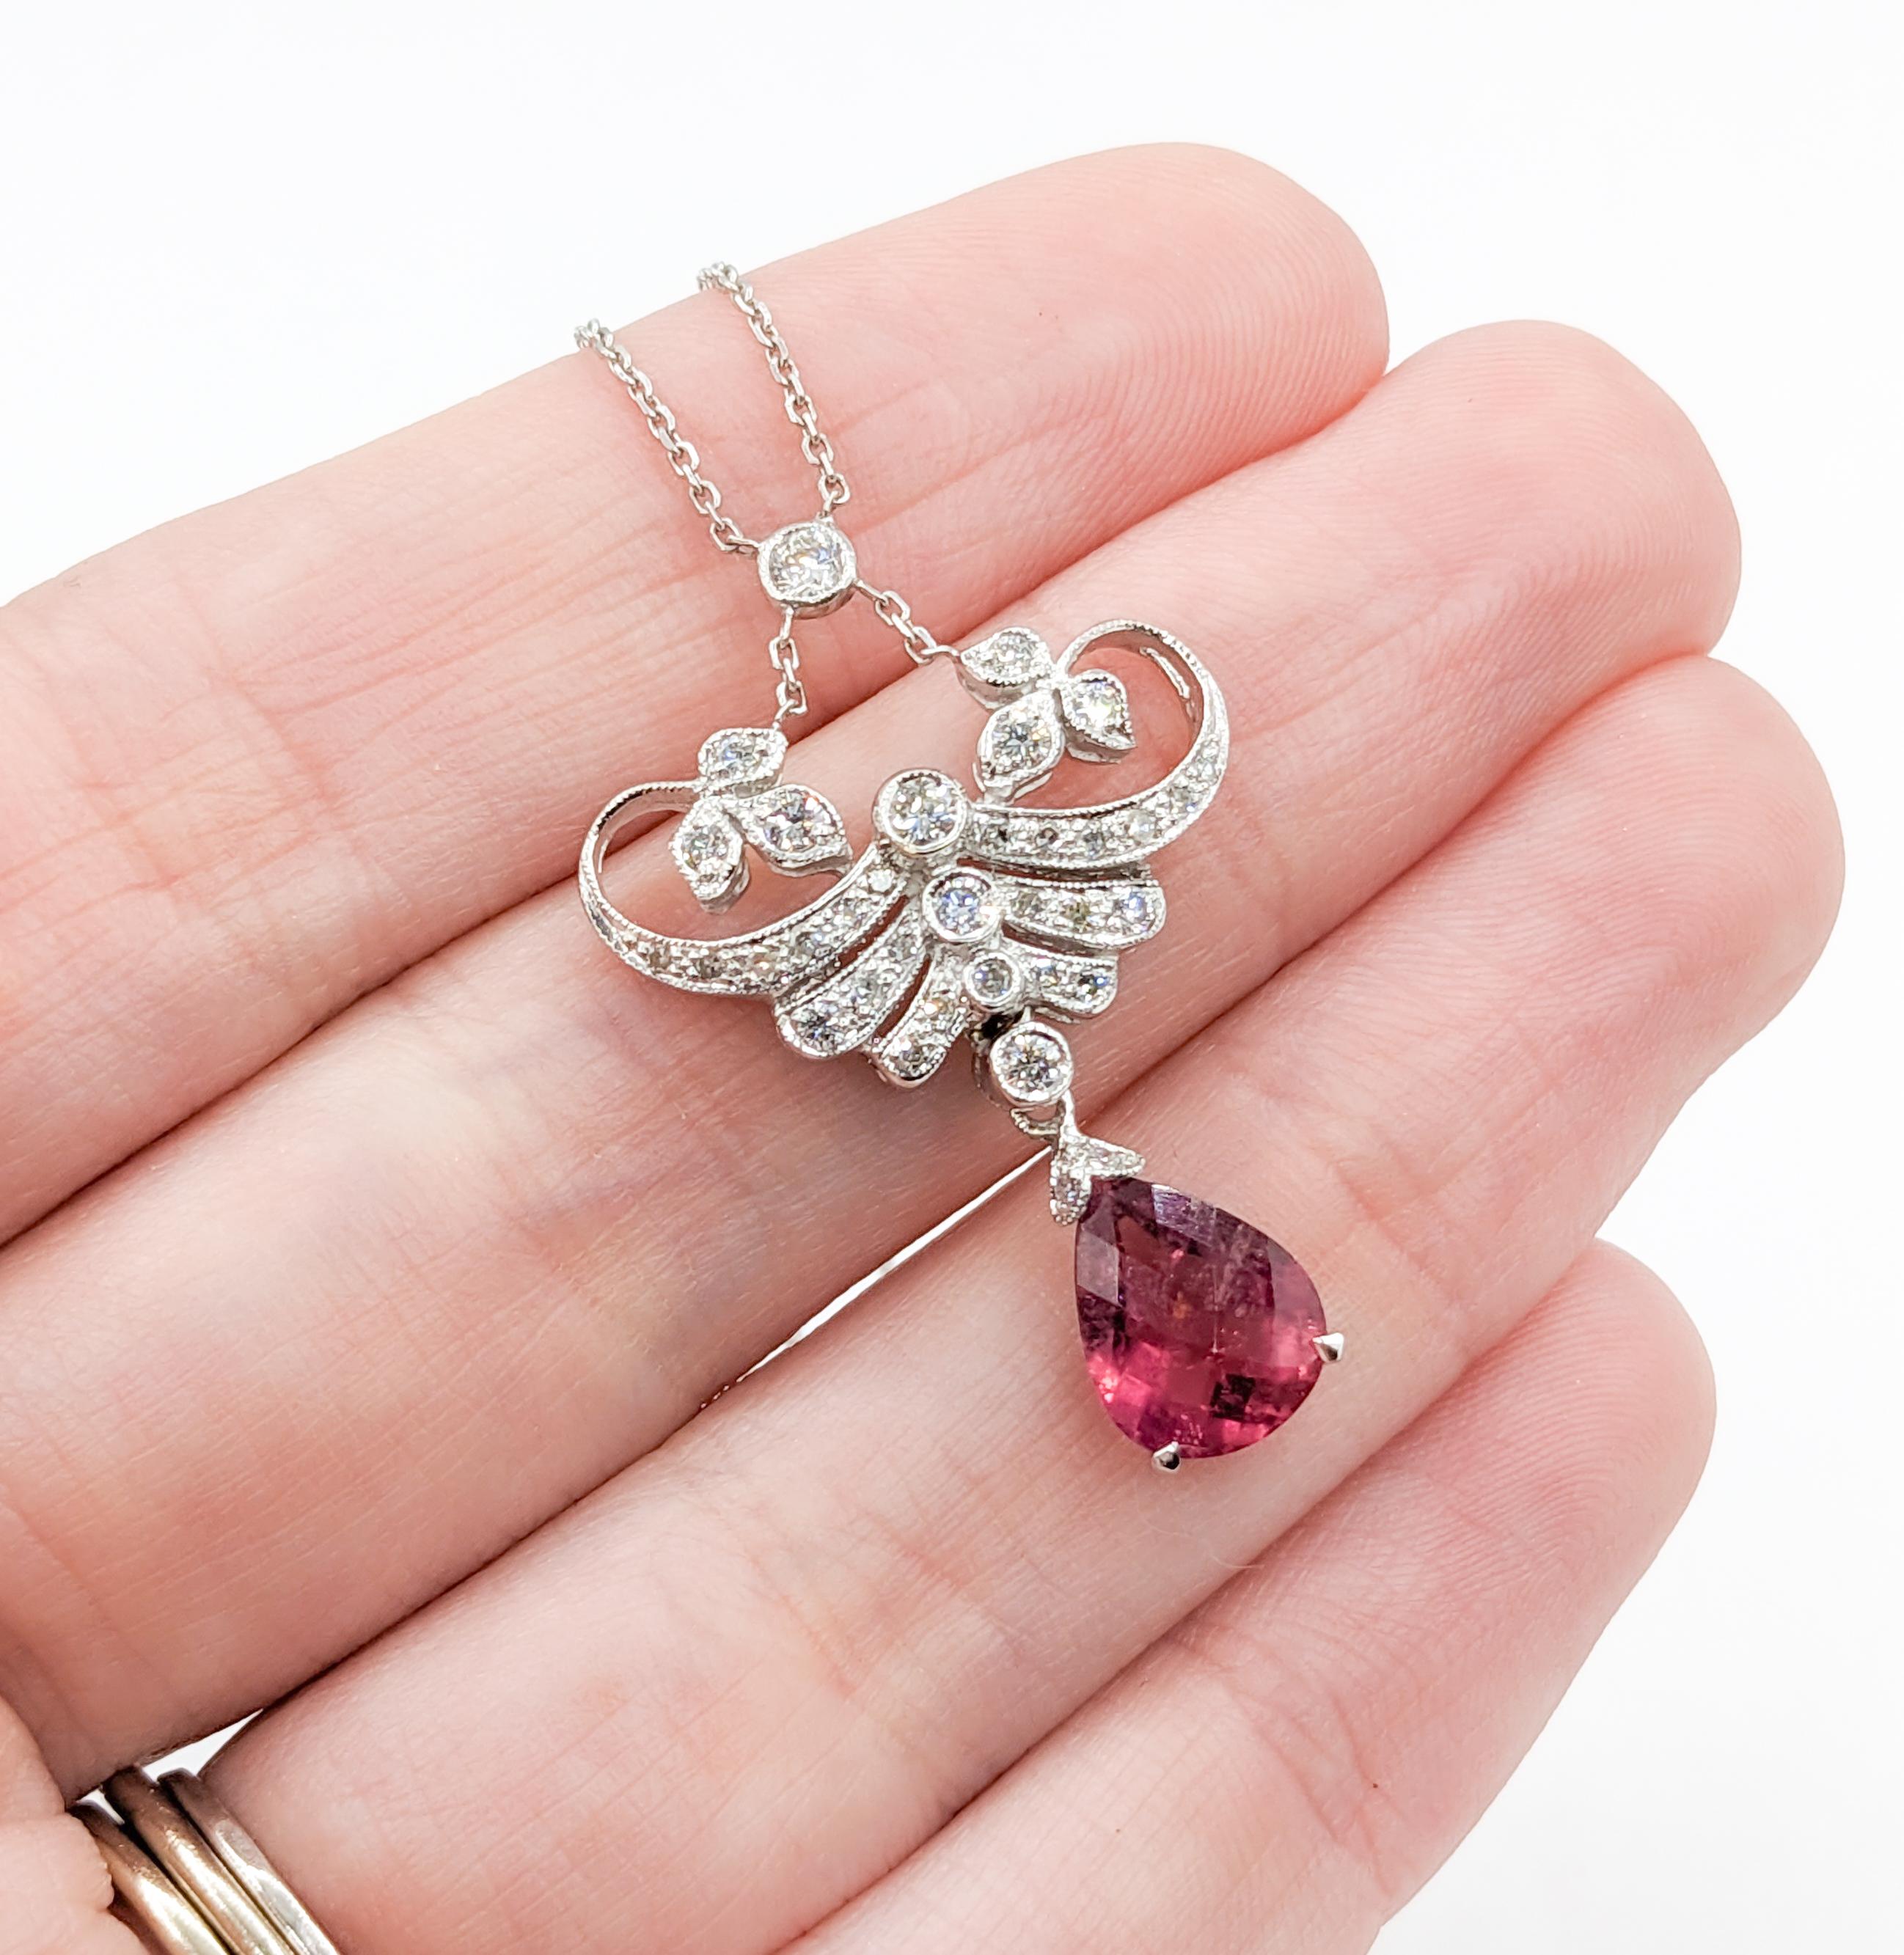 Diamond & Tourmaline Lavaliere - 18K White Gold

Crafted from 18kt white gold, this exquisite necklace showcases a stunning 1.65ct pear-cut tourmaline that elegantly dangles beneath round brilliant-cut diamonds weighing 0.35ctw. The diamonds boast a